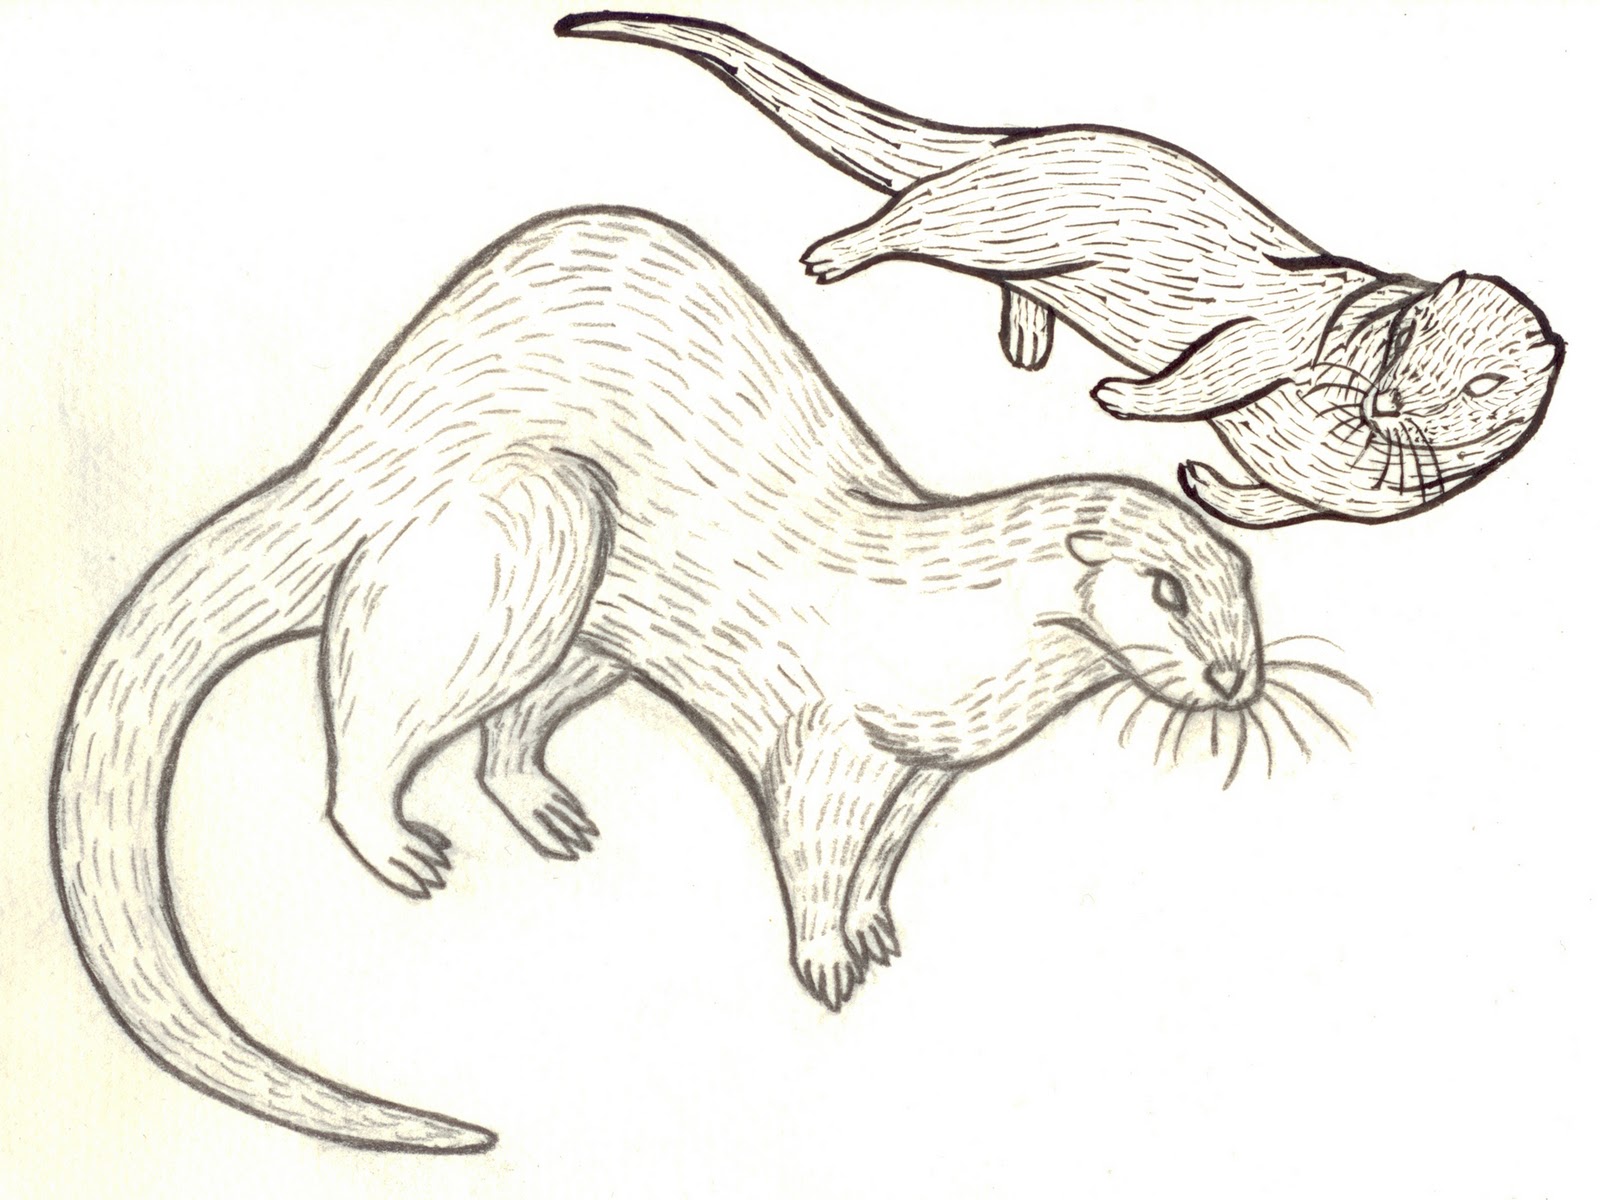 Examples of otter drawings